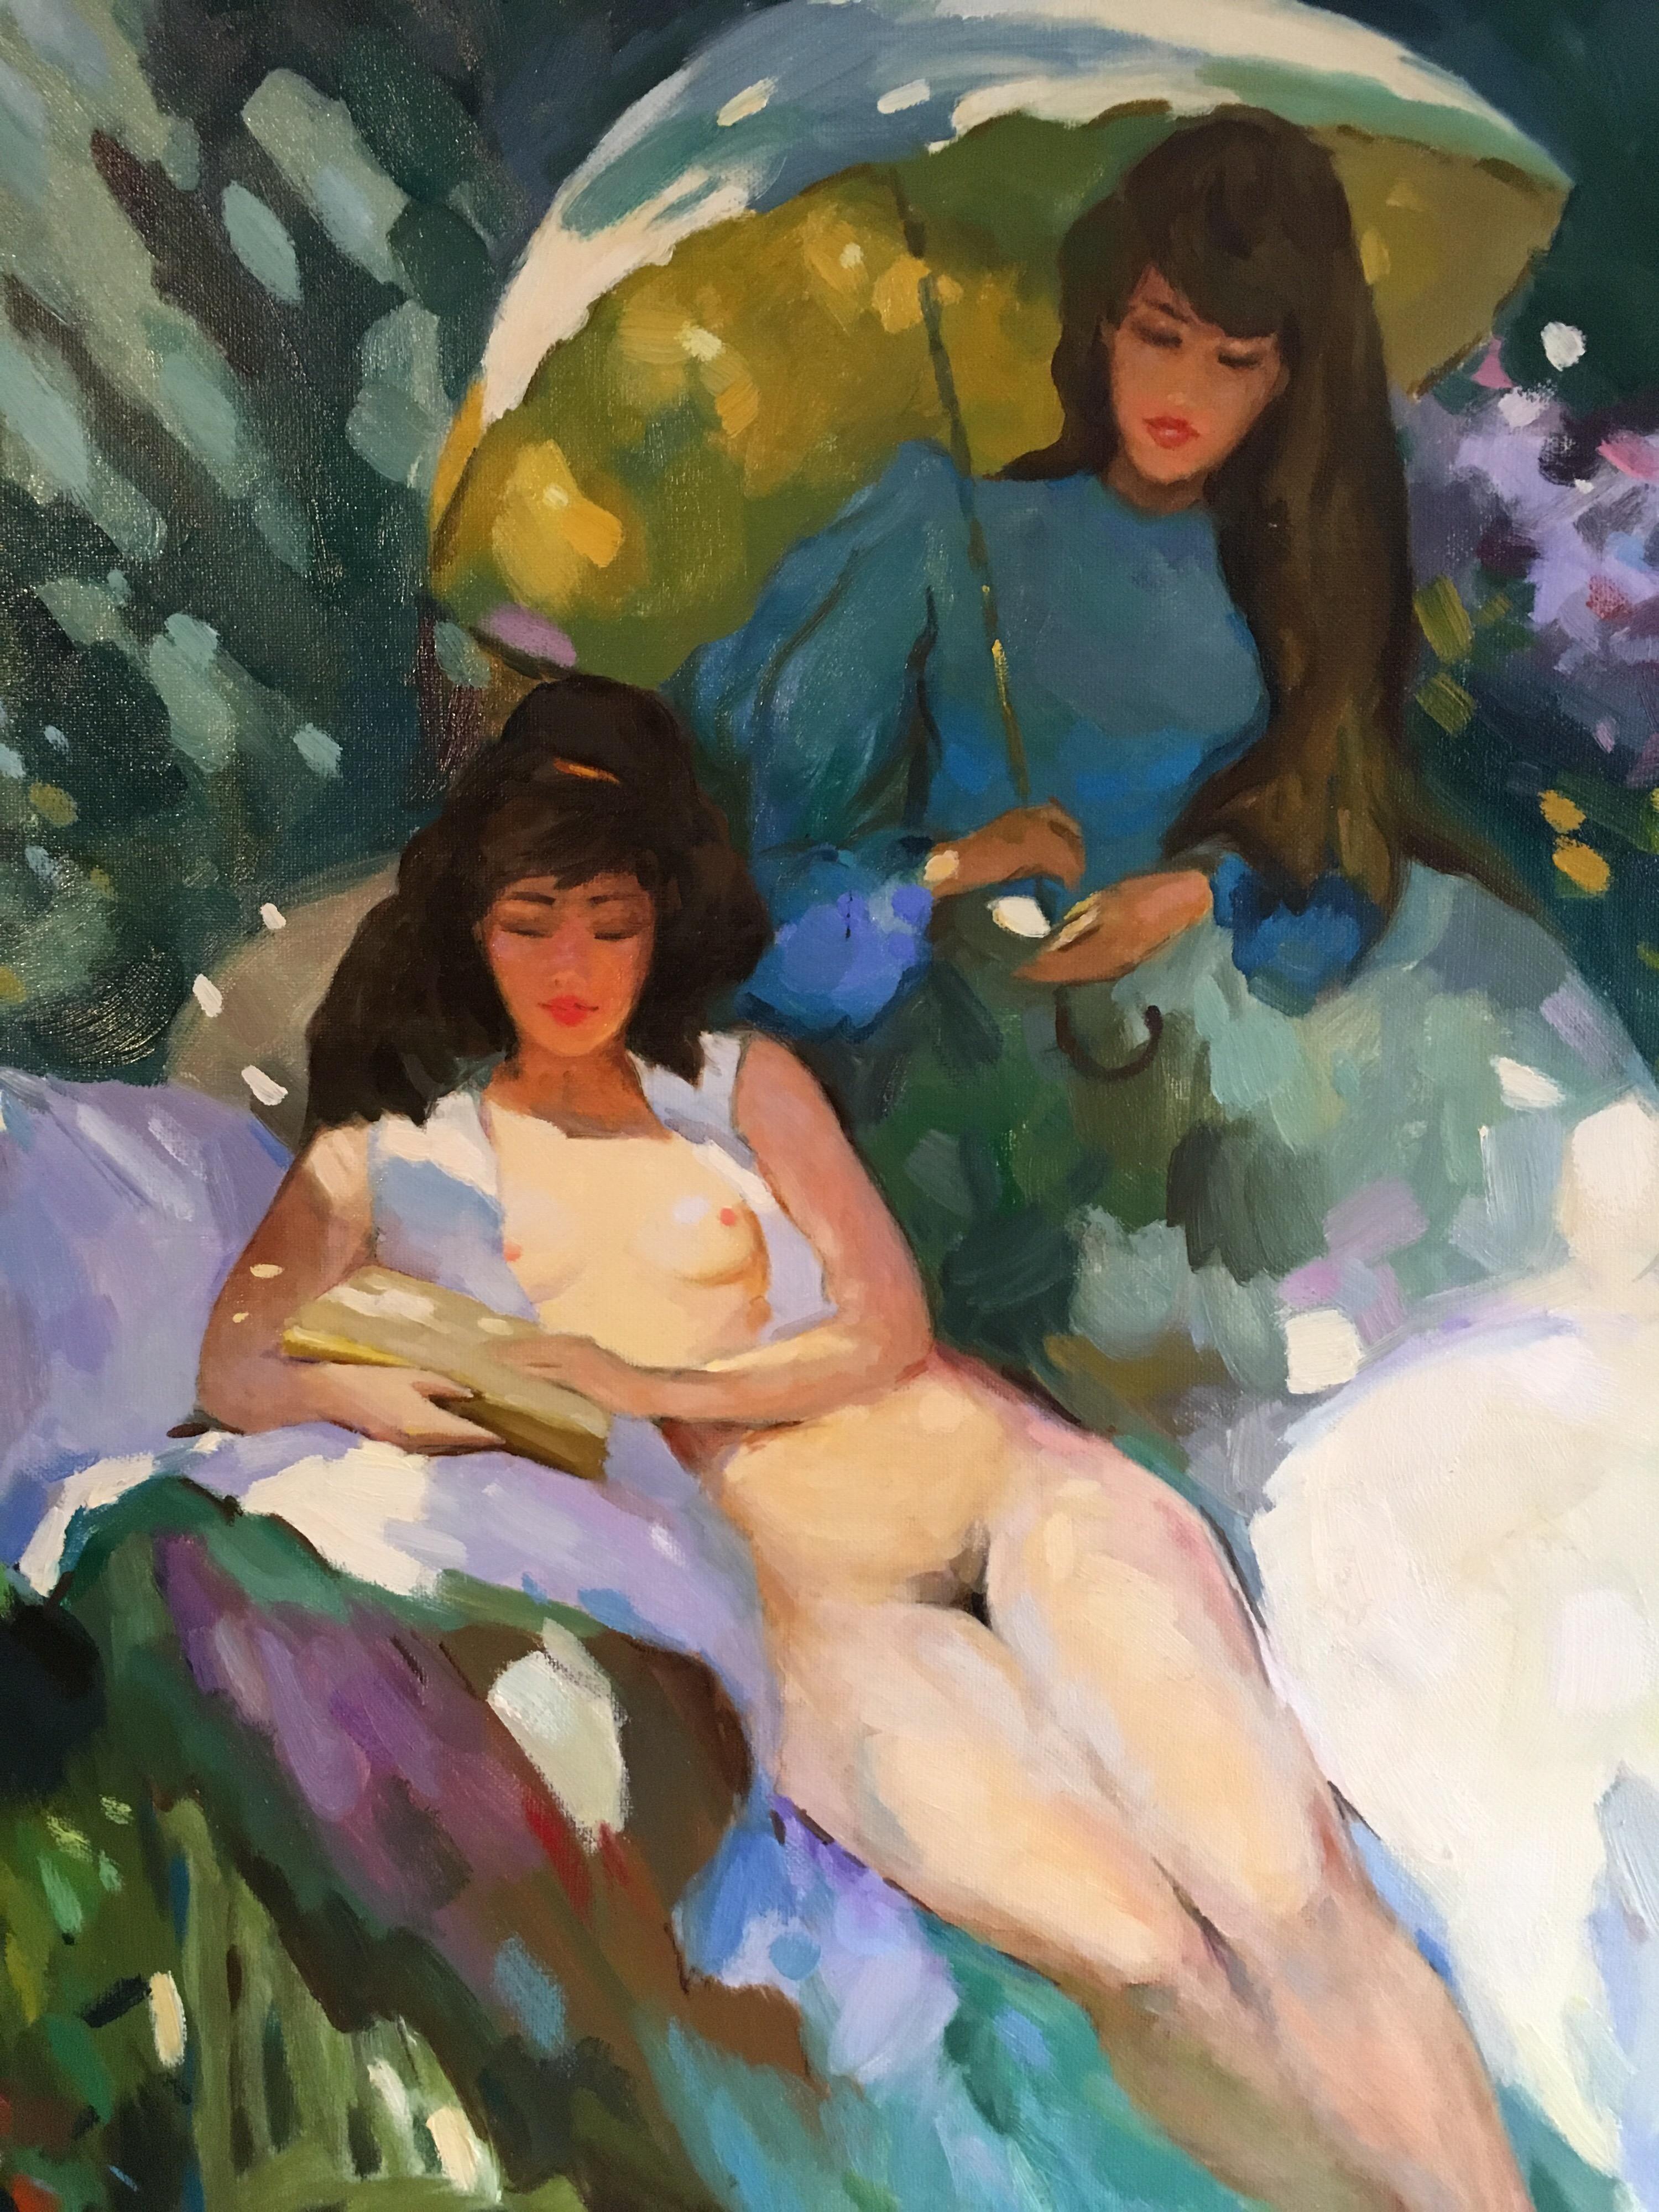 Large Impressionist Nude, Floral Scene, Original Oil Painting
Russian School, 20th Century
Oil painting on canvas, unframed
Canvas size: 30 x 25 inches

Extraordinary oil painting of two women, sat in a nonchalant fashion in their garden. One of the